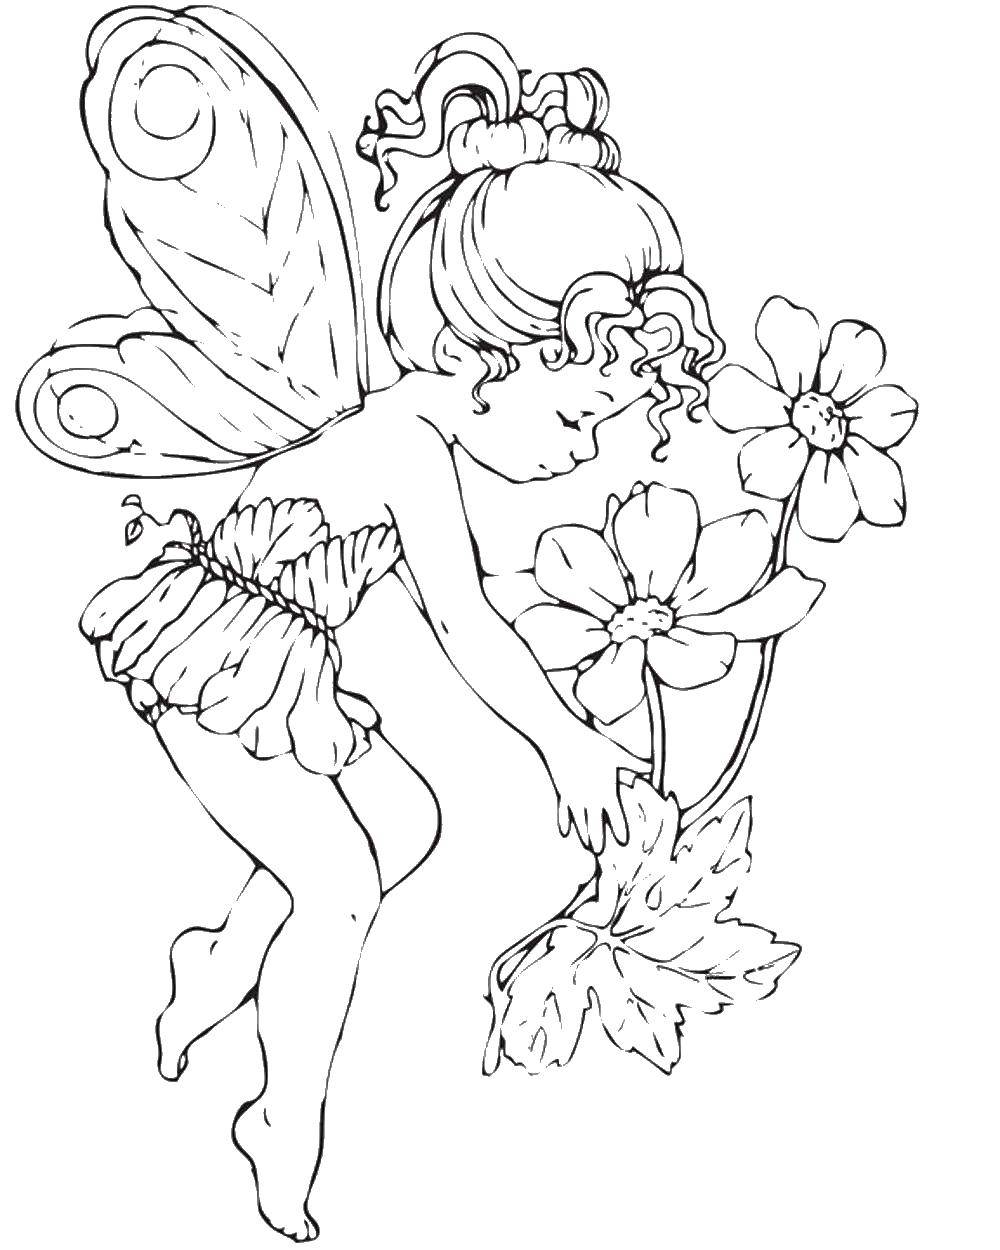 Coloring Little fairy with flowers. Category Fantasy. Tags:  fantasy, flowers, girl, fairy.